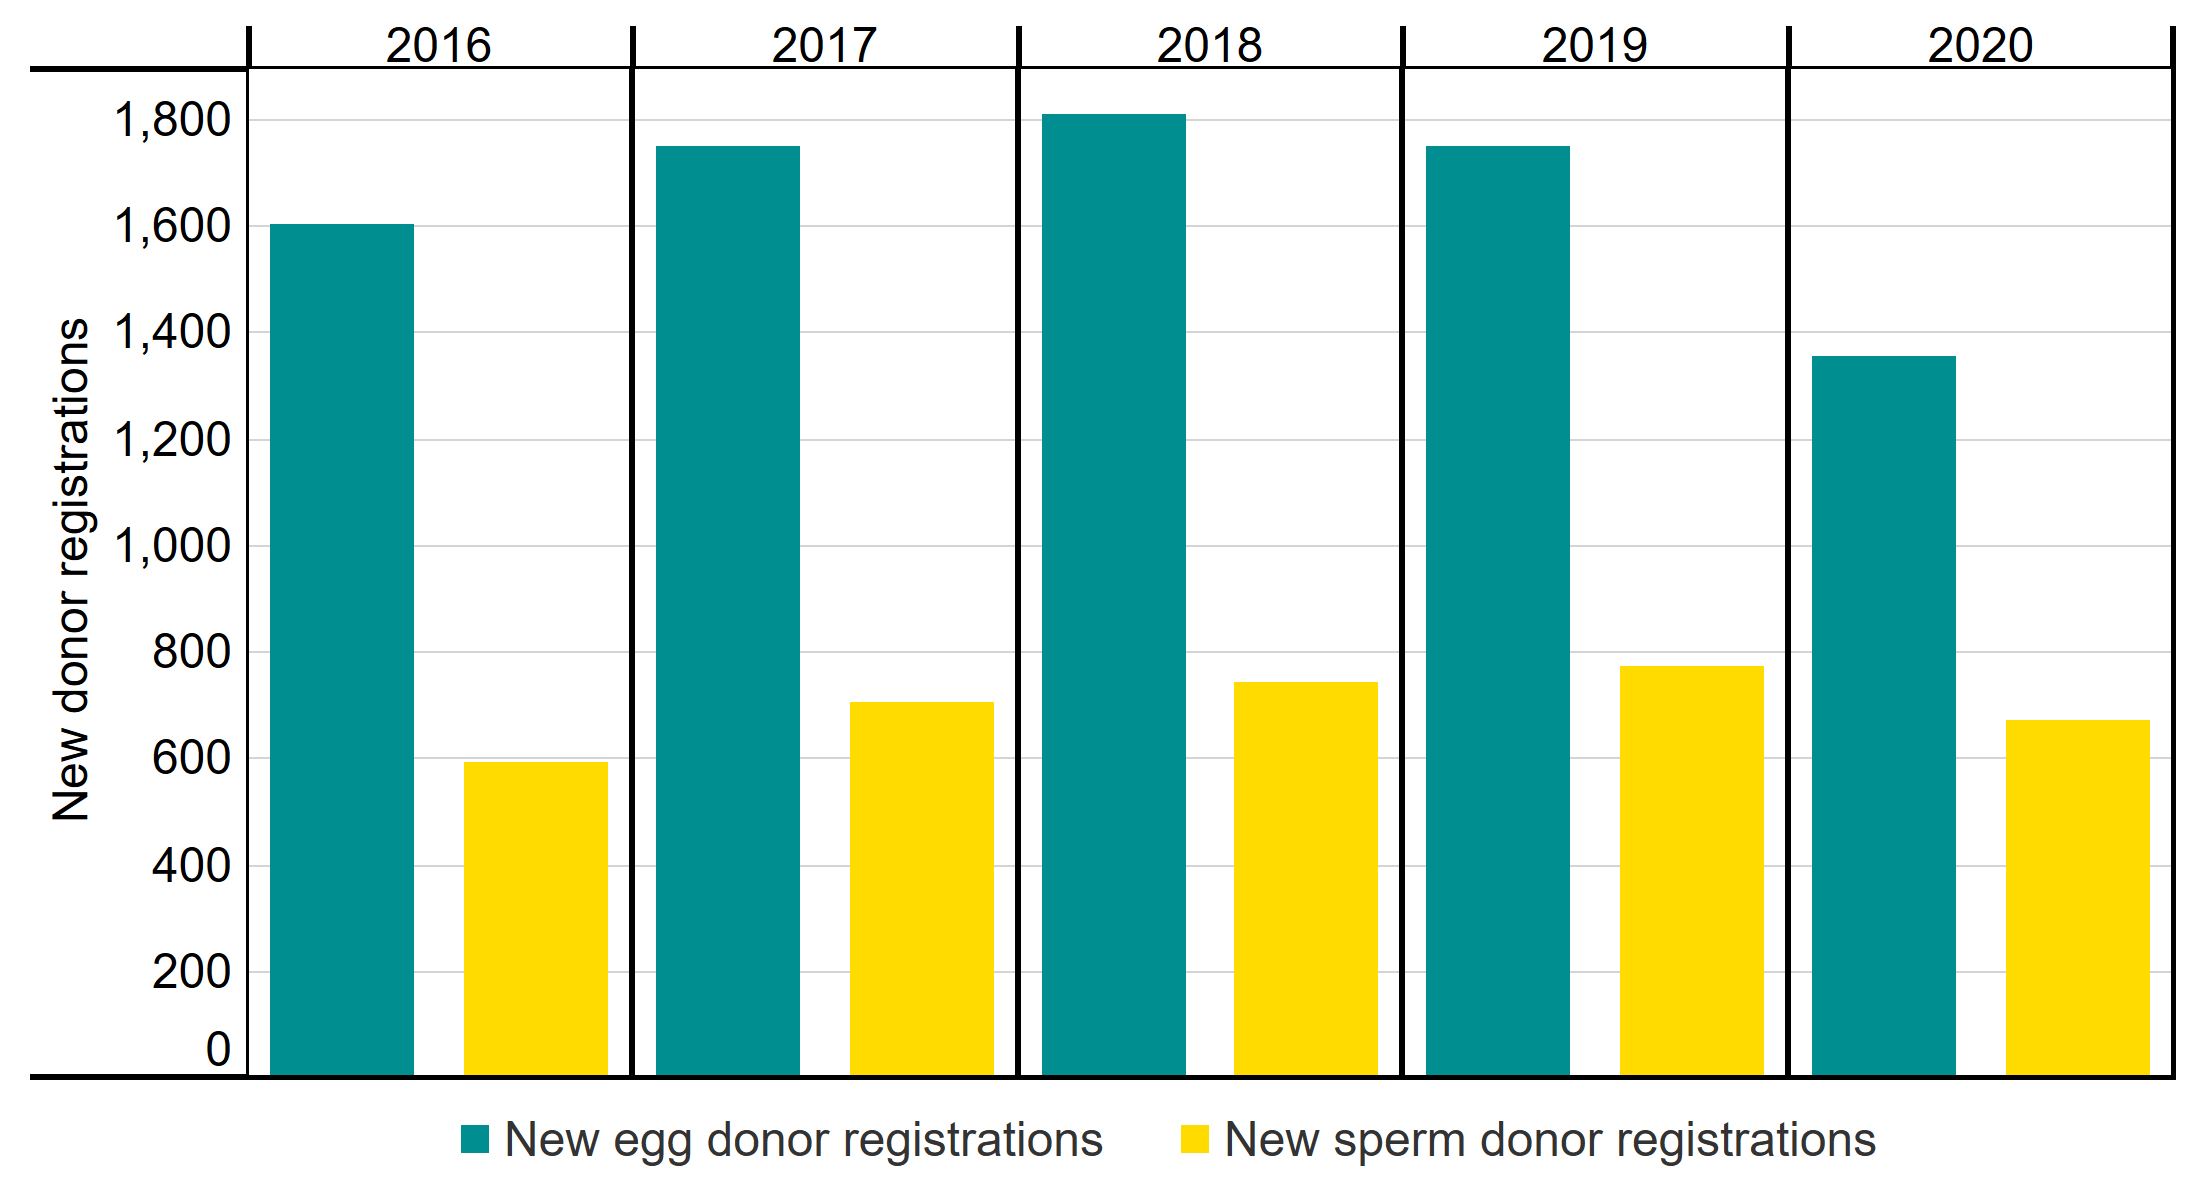 Figure 3: Number of new egg and sperm donor registrations, 2016-2020. Number of new egg and sperm donor registrations, 2016-2020. This bar chart shows the number of new egg and sperm donor registrations, from 2016-2020. From 2016-2019 new egg and sperm donor registrations remained around 1,700 and 700 per year respectively. New egg and sperm donor registrations both decreased in 2020. New egg donor registrations decreased more than new sperm donor registrations in 2020. An accessible form of the underlying data for this figure can be downloaded at the start of the report in .xls format.